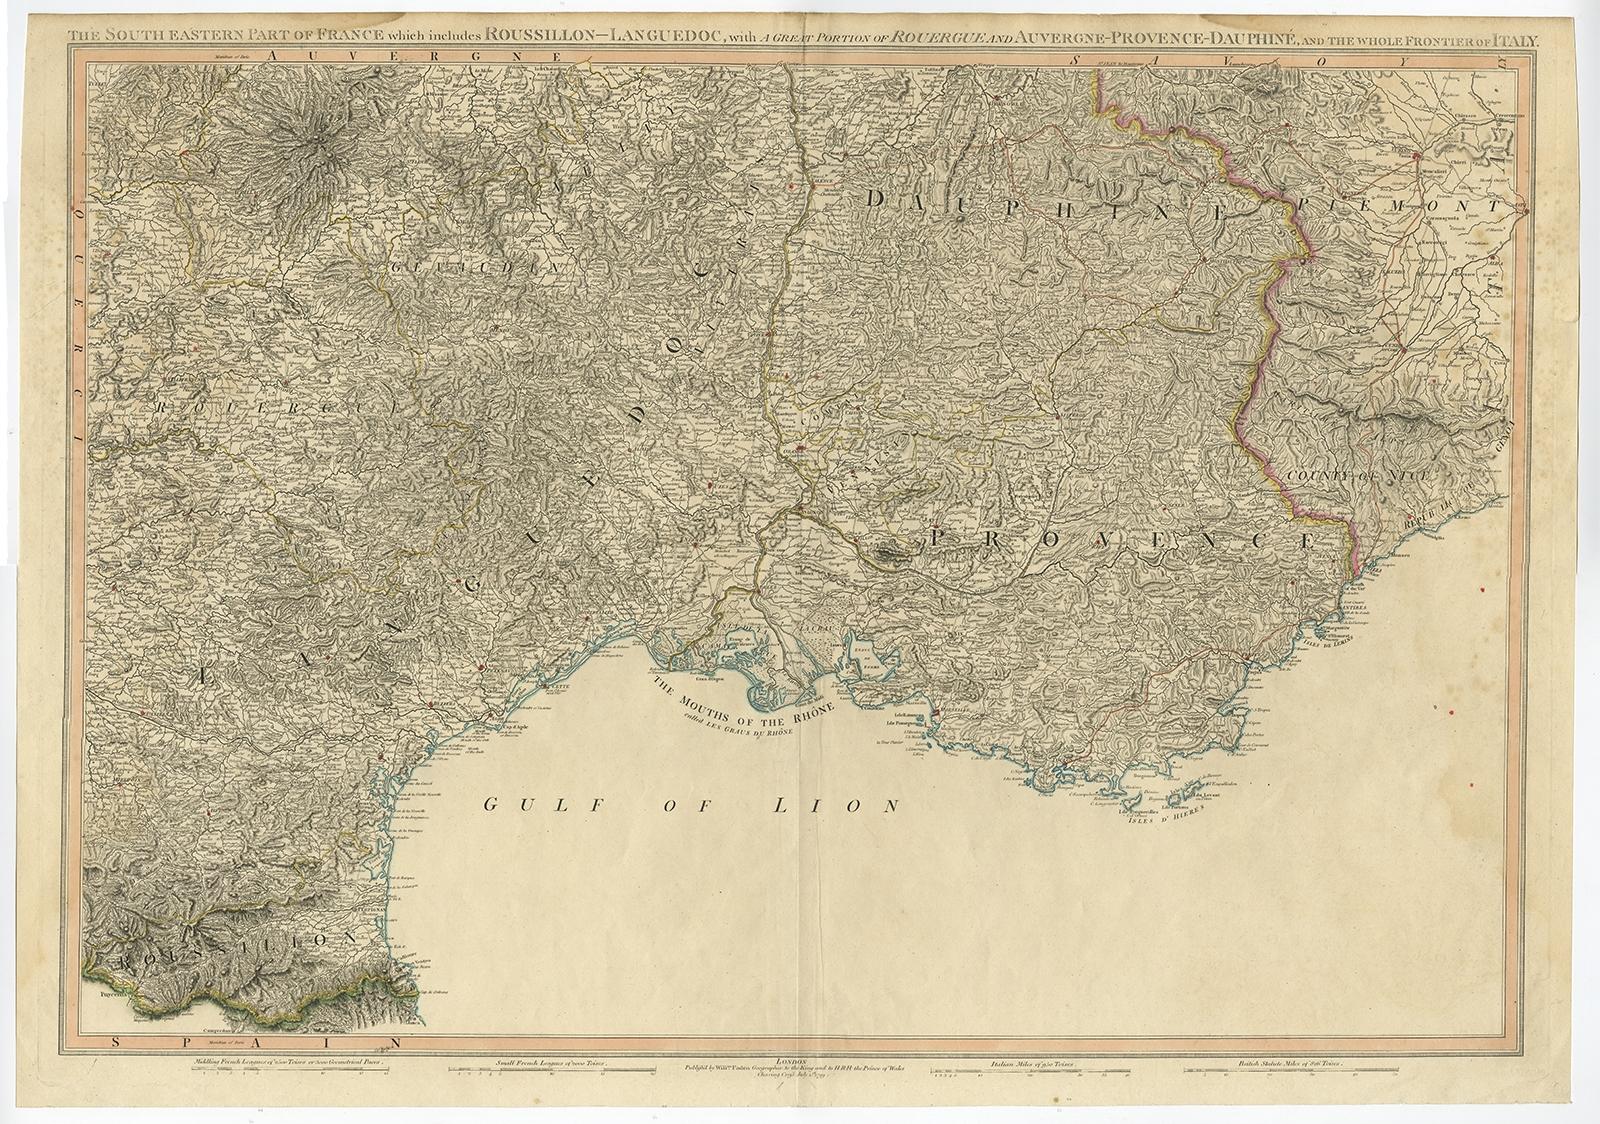 Antique map titled 'The South Eastern Part of France which includes Roussillon-Languedoc, with a Great Portion of Rouergue and Auvergne-Provence-Dauphine, and the Whole Frontier of Italy'. 

Striking large format map of Southeastern France,